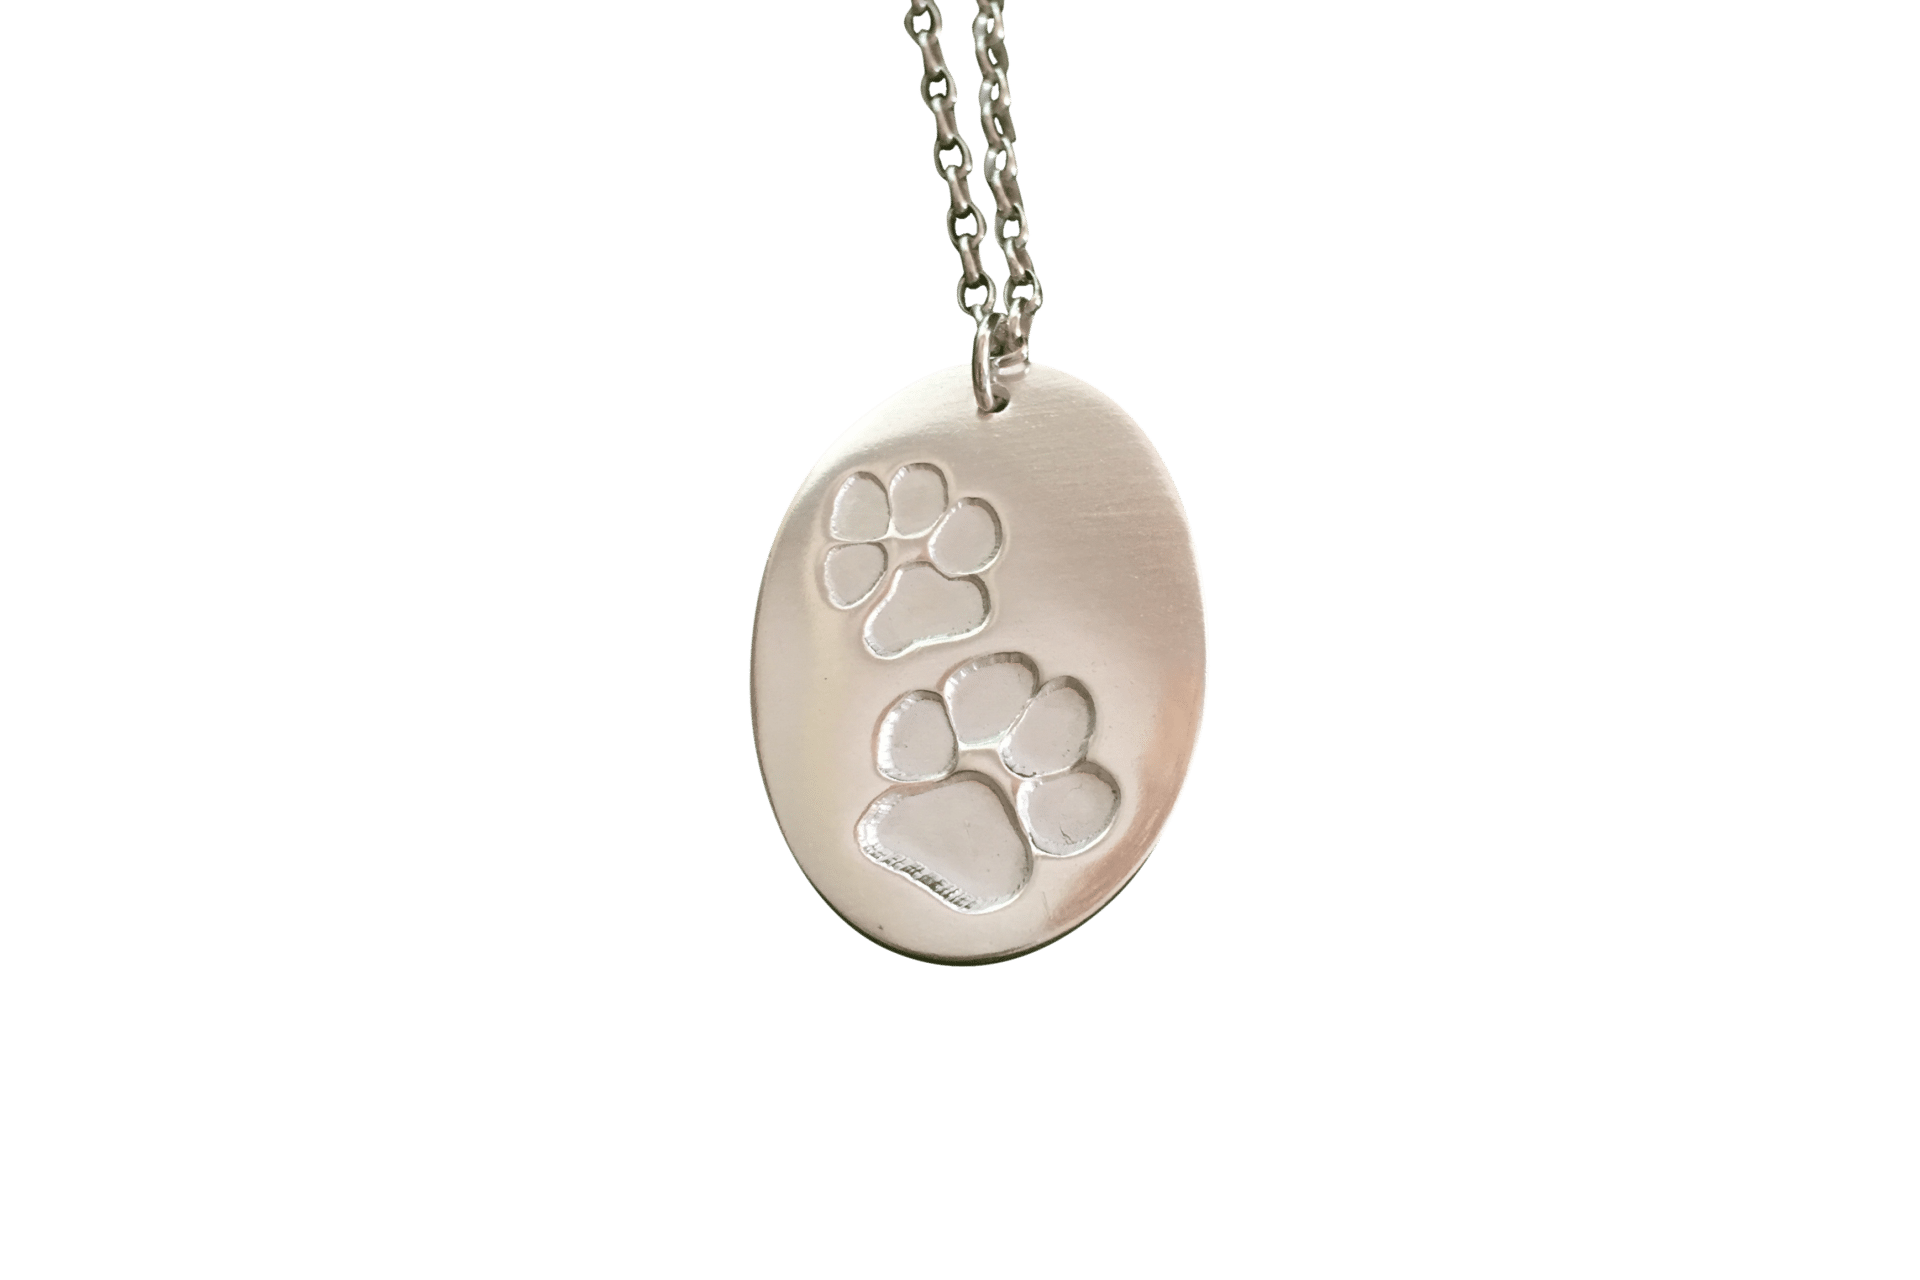 Pet Paw Prints Oval Pendant Necklace on Silver Belcher Chain